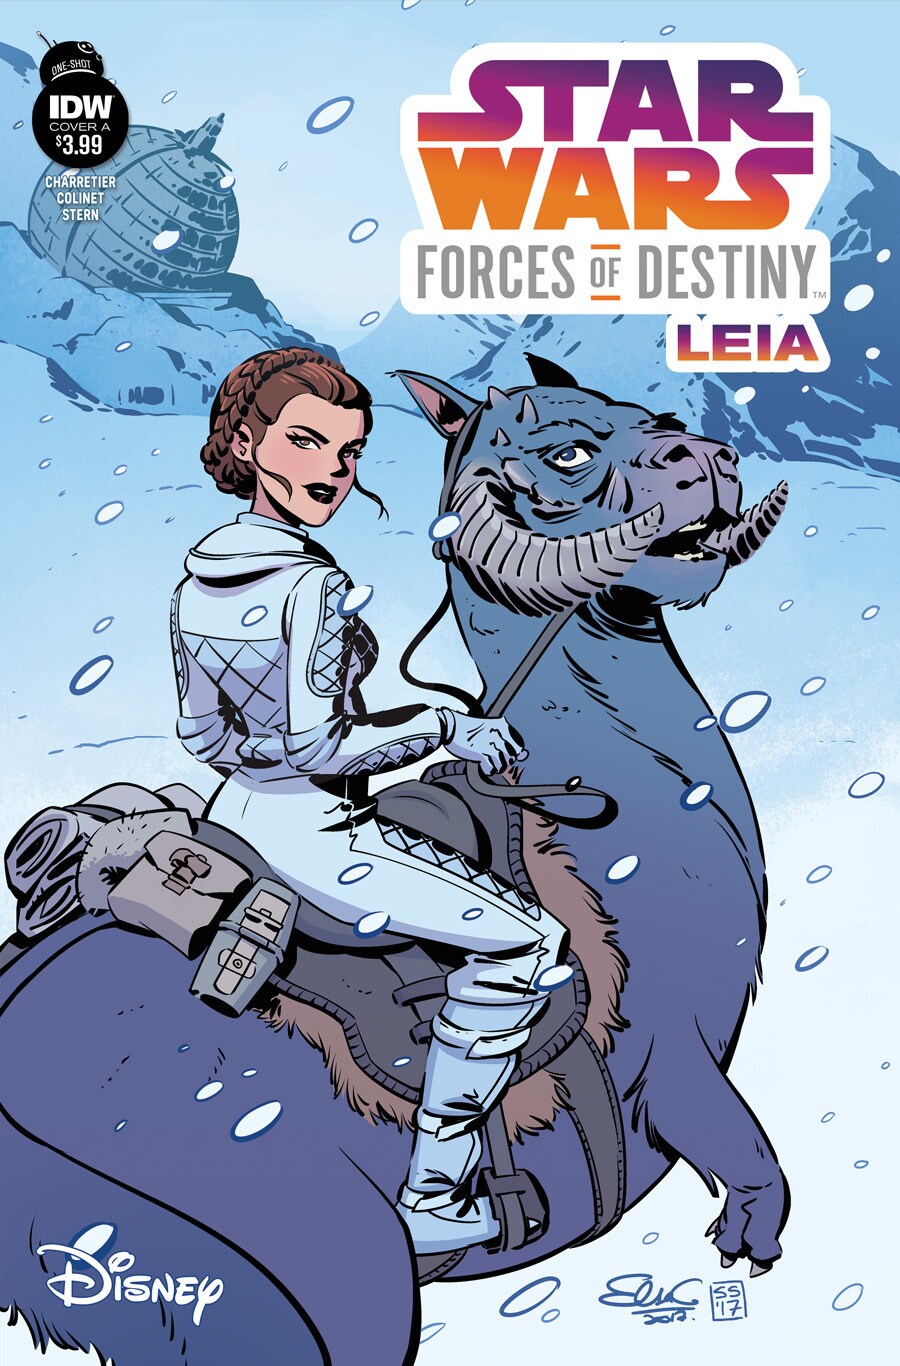 Princess Leia rides a tauntaun on the cover of the Star Wars Forces of Destiny: Leia comic book.